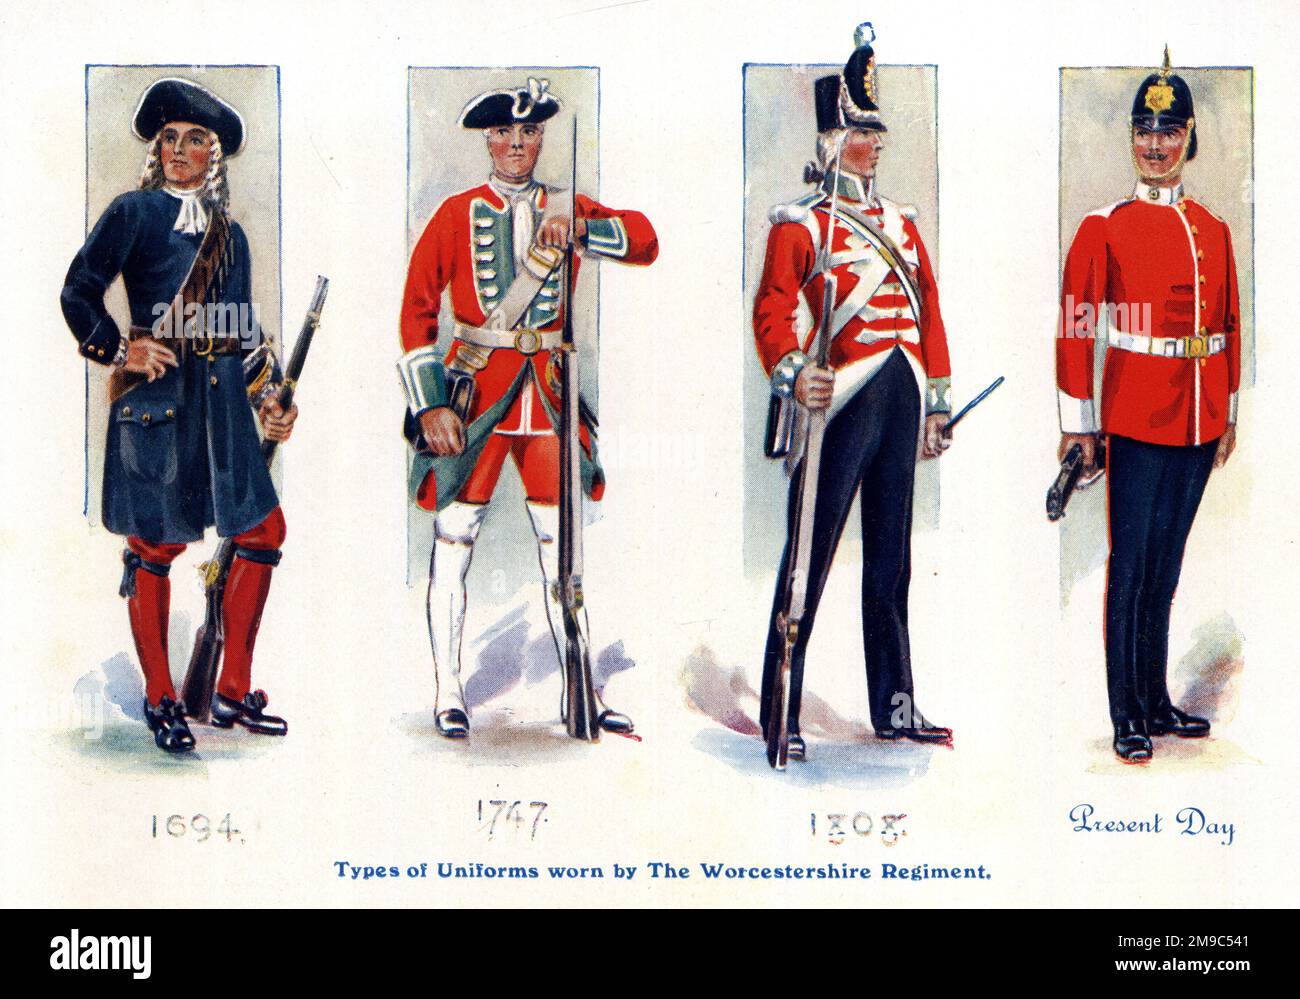 Four types of Uniforms worn by the Worcestershire Regiment - 1694, 1747, 1808, 1915 Stock Photo